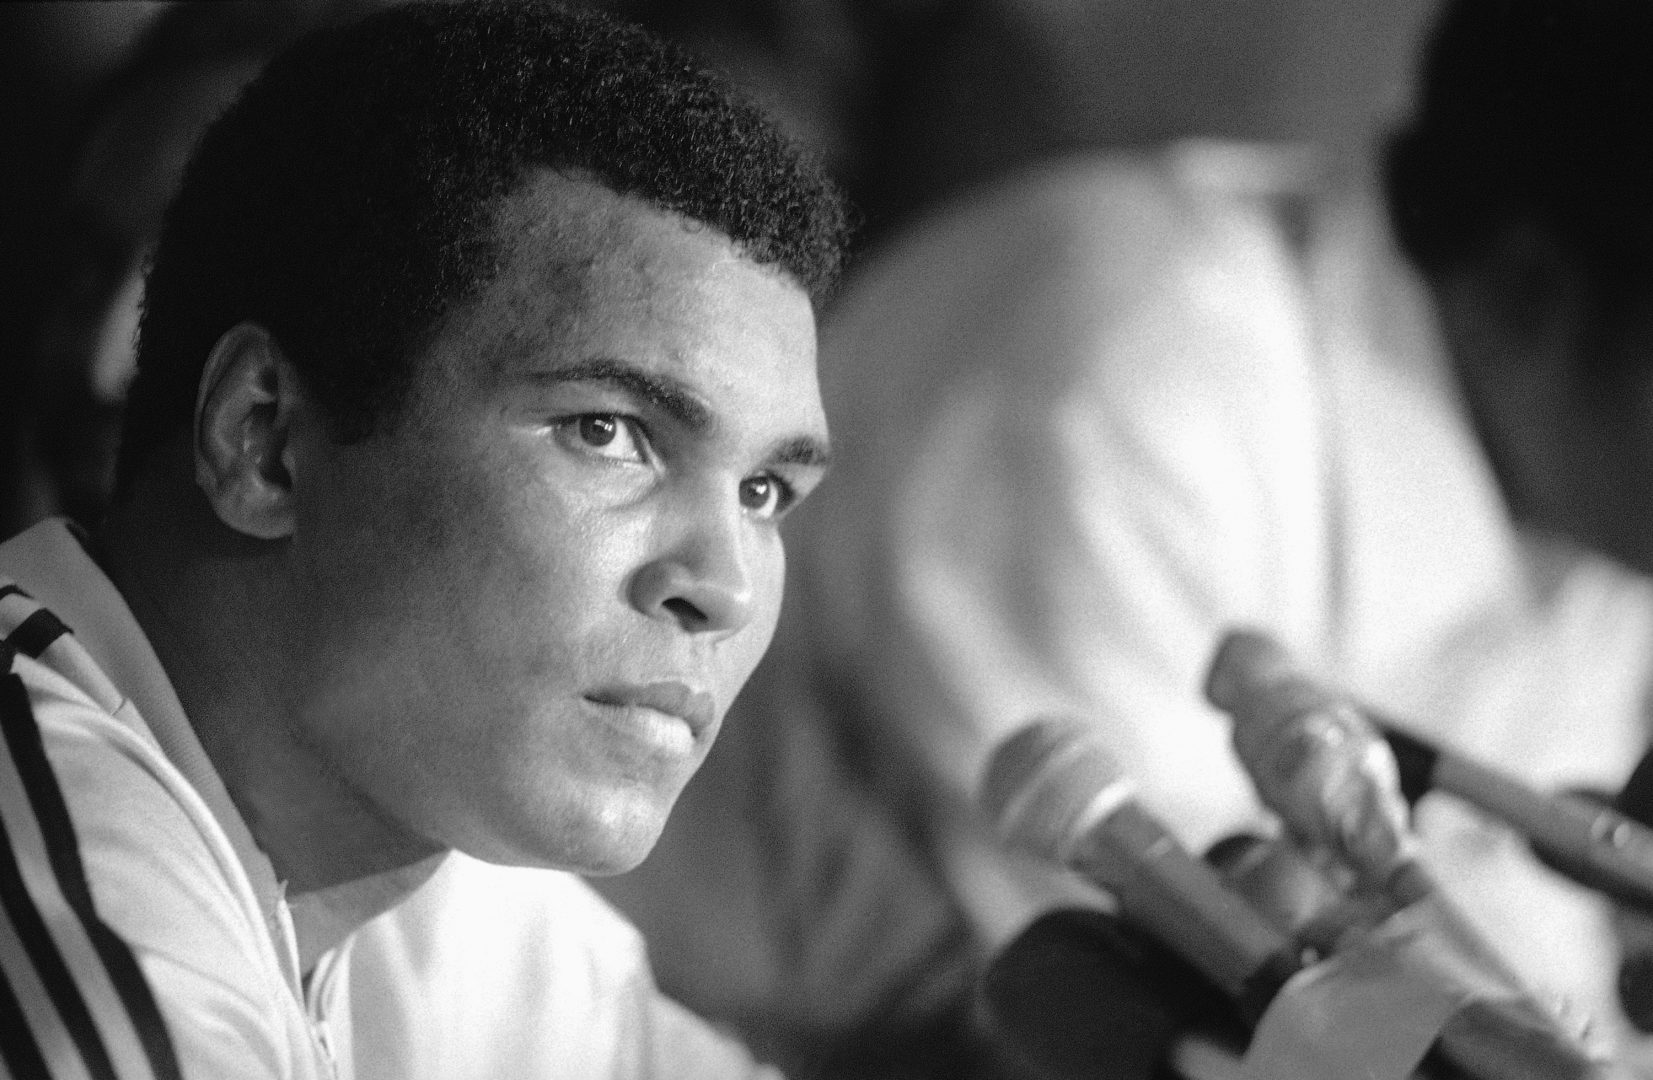 Muhammad Ali ponders a question at news conference following his WBA heavyweight title bout with Leon Spinks in New Orleans on Friday, Sept. 16, 1978. Ali regained his title with a 15-round unanimous decision.